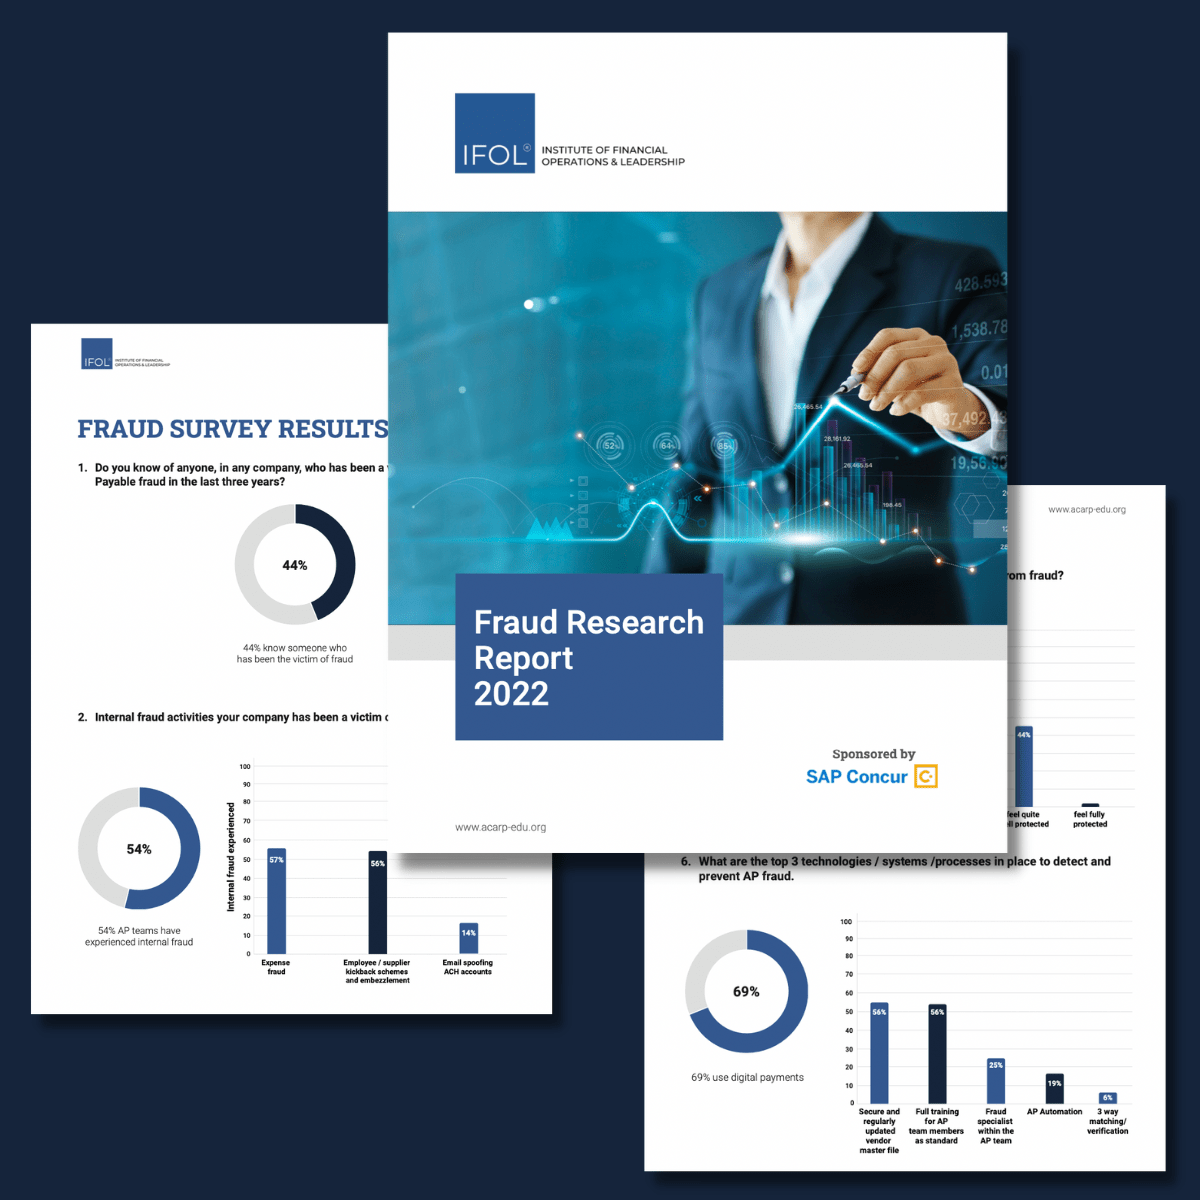 Fraud Research Report 2022